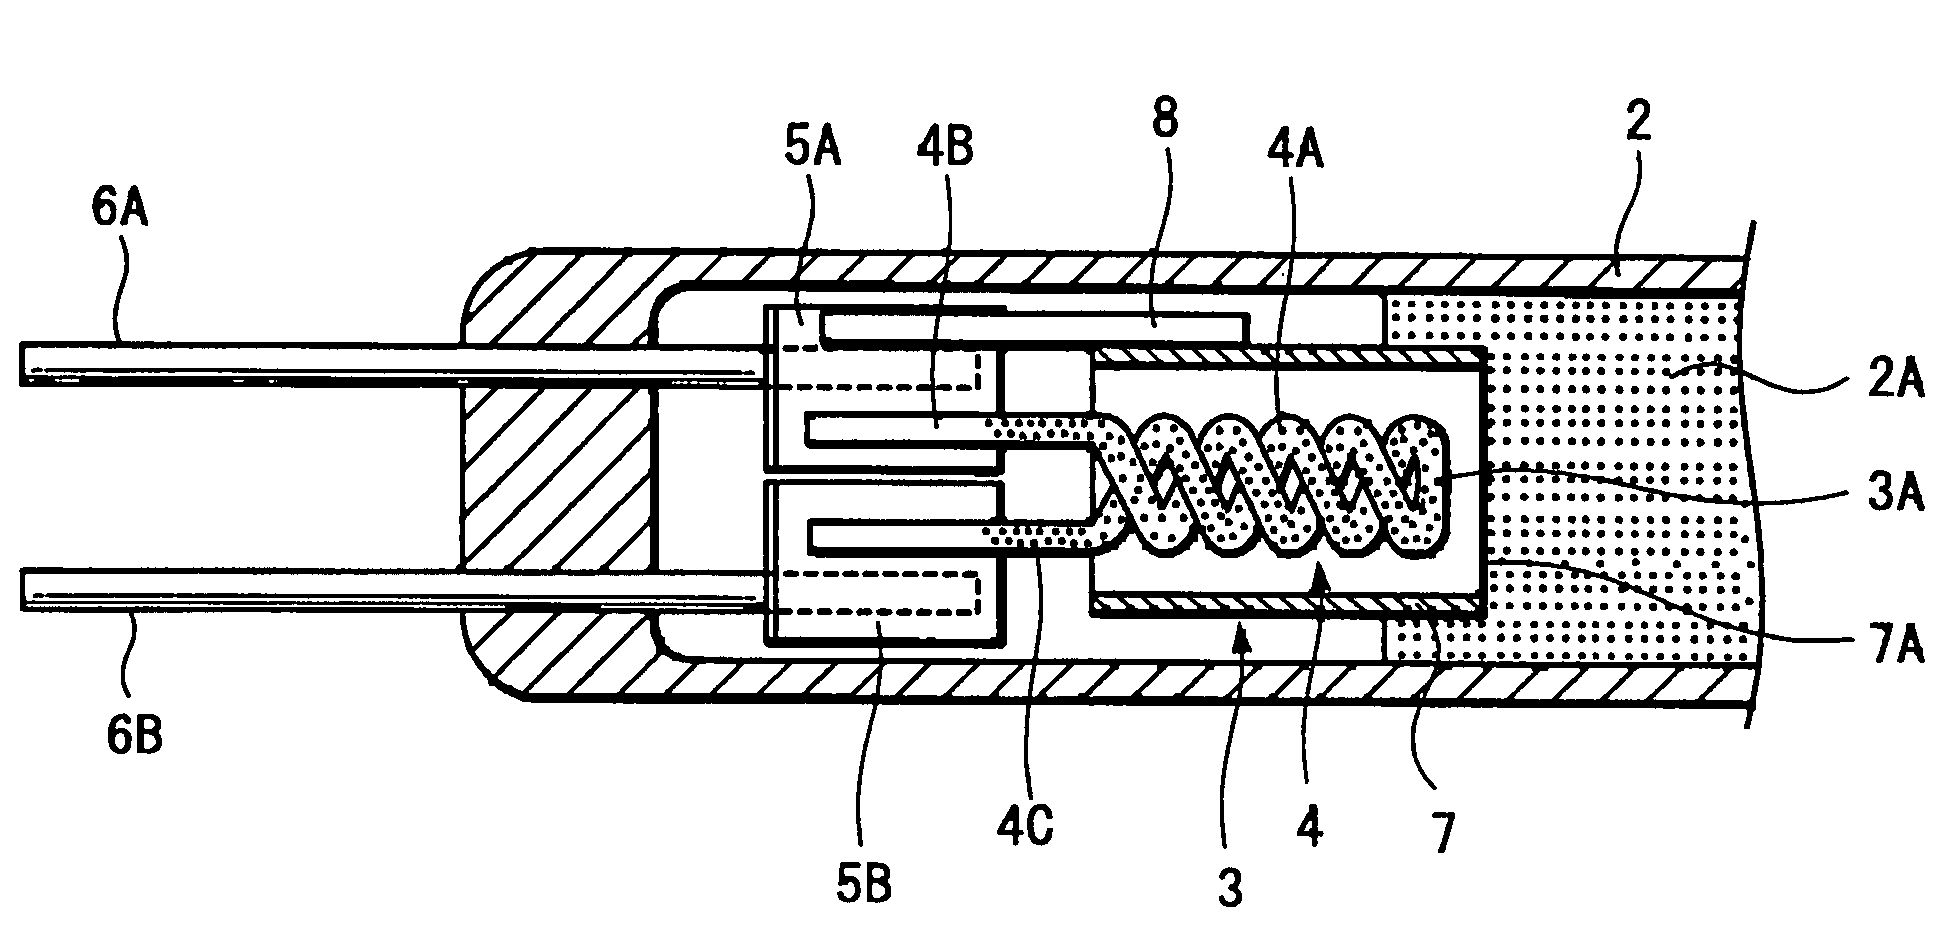 Discharge lamp and illumination apparatus with gas fill